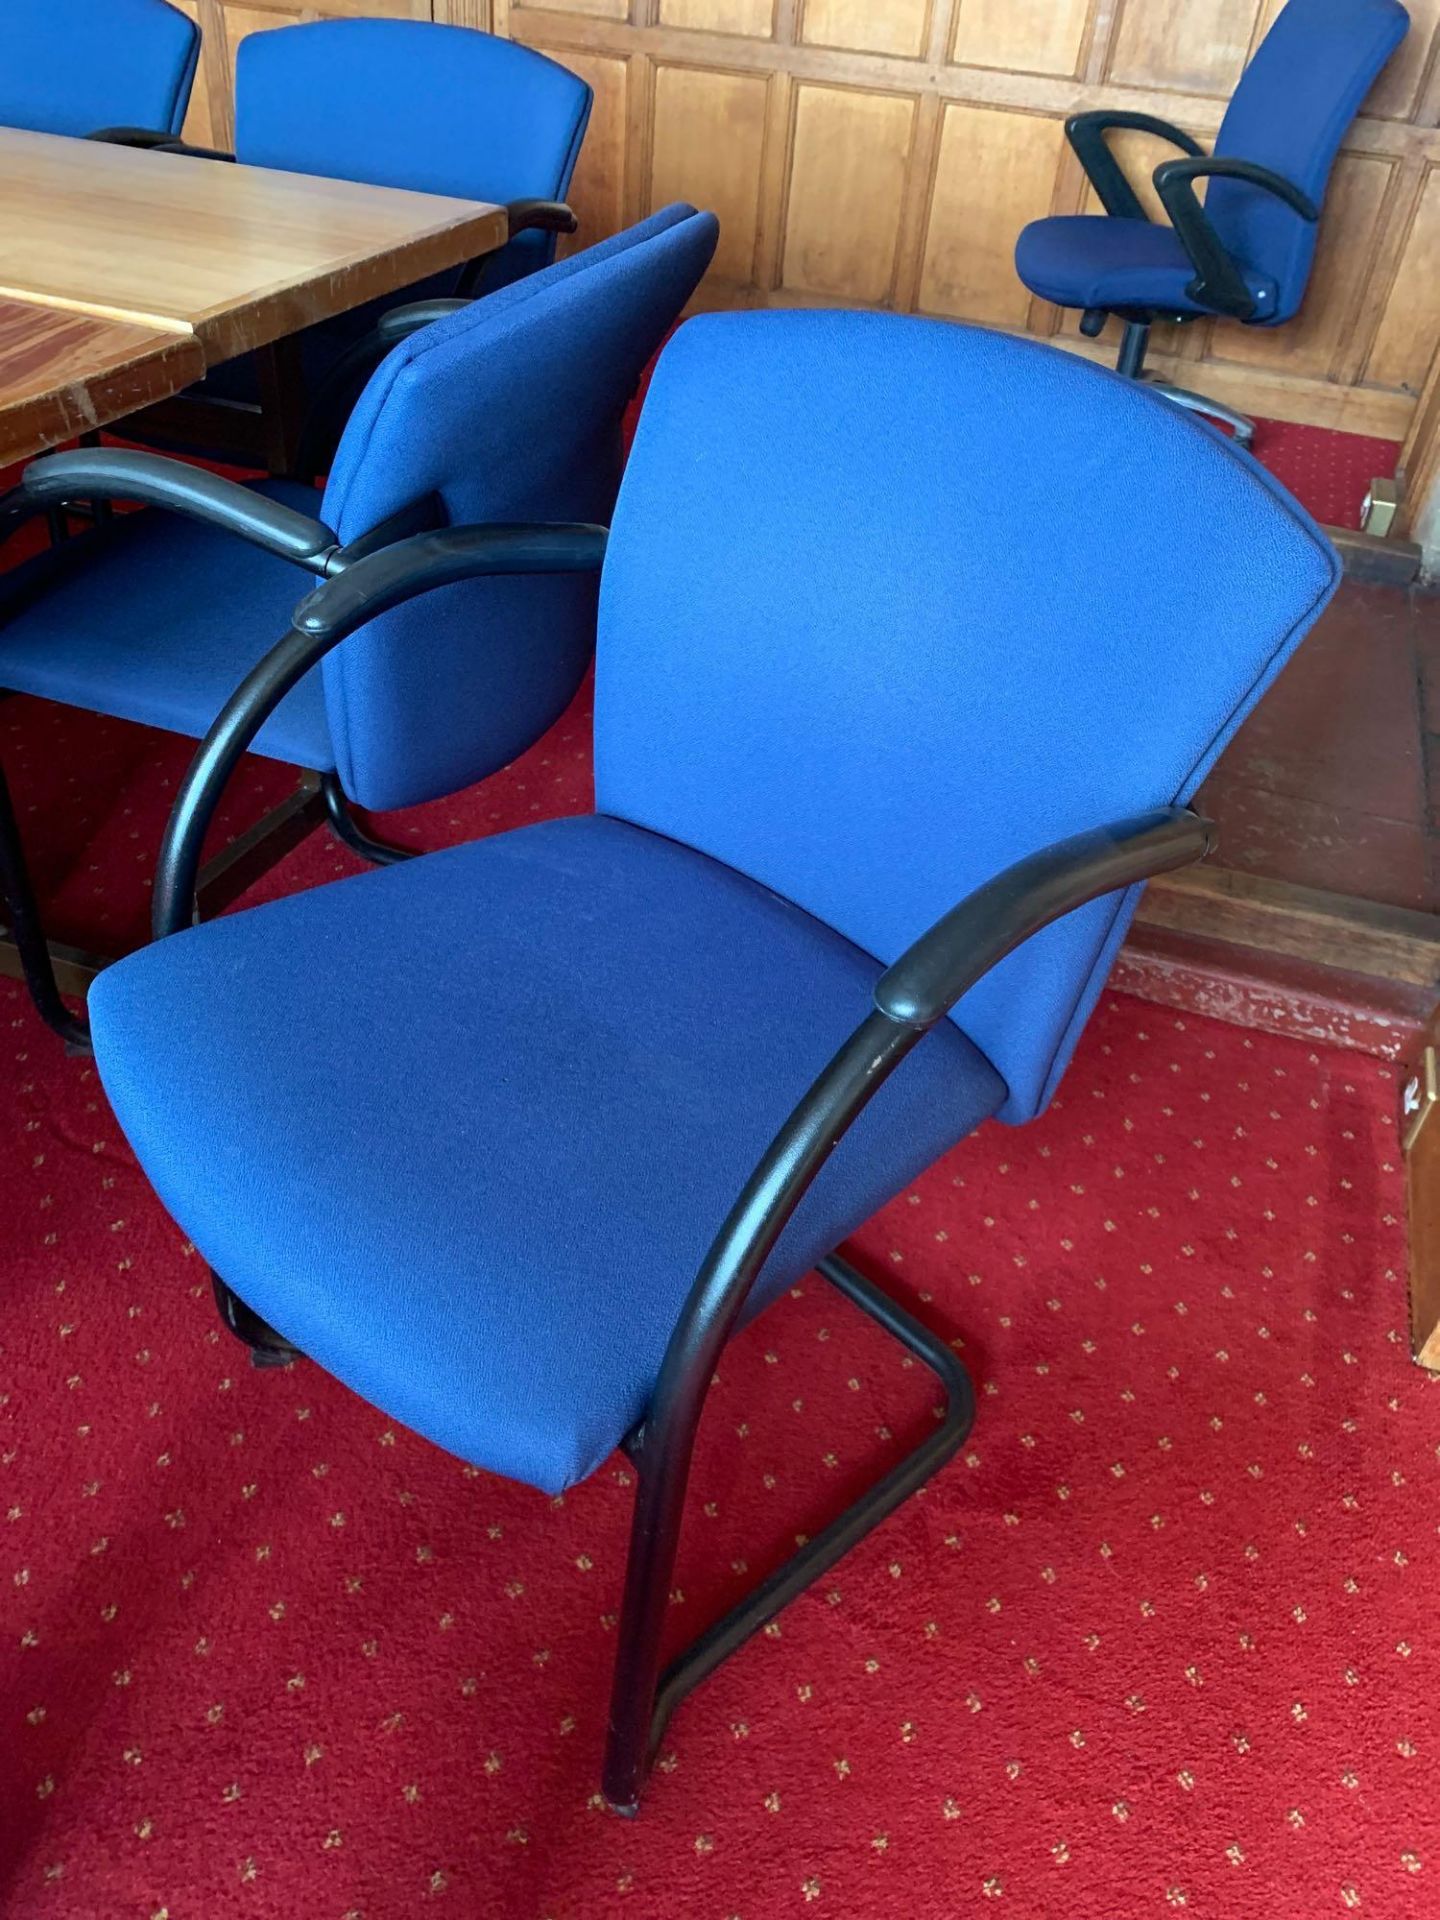 12 x Burgess Furniture Cantilever Armchairs With Blue Upholstery And Black Frame